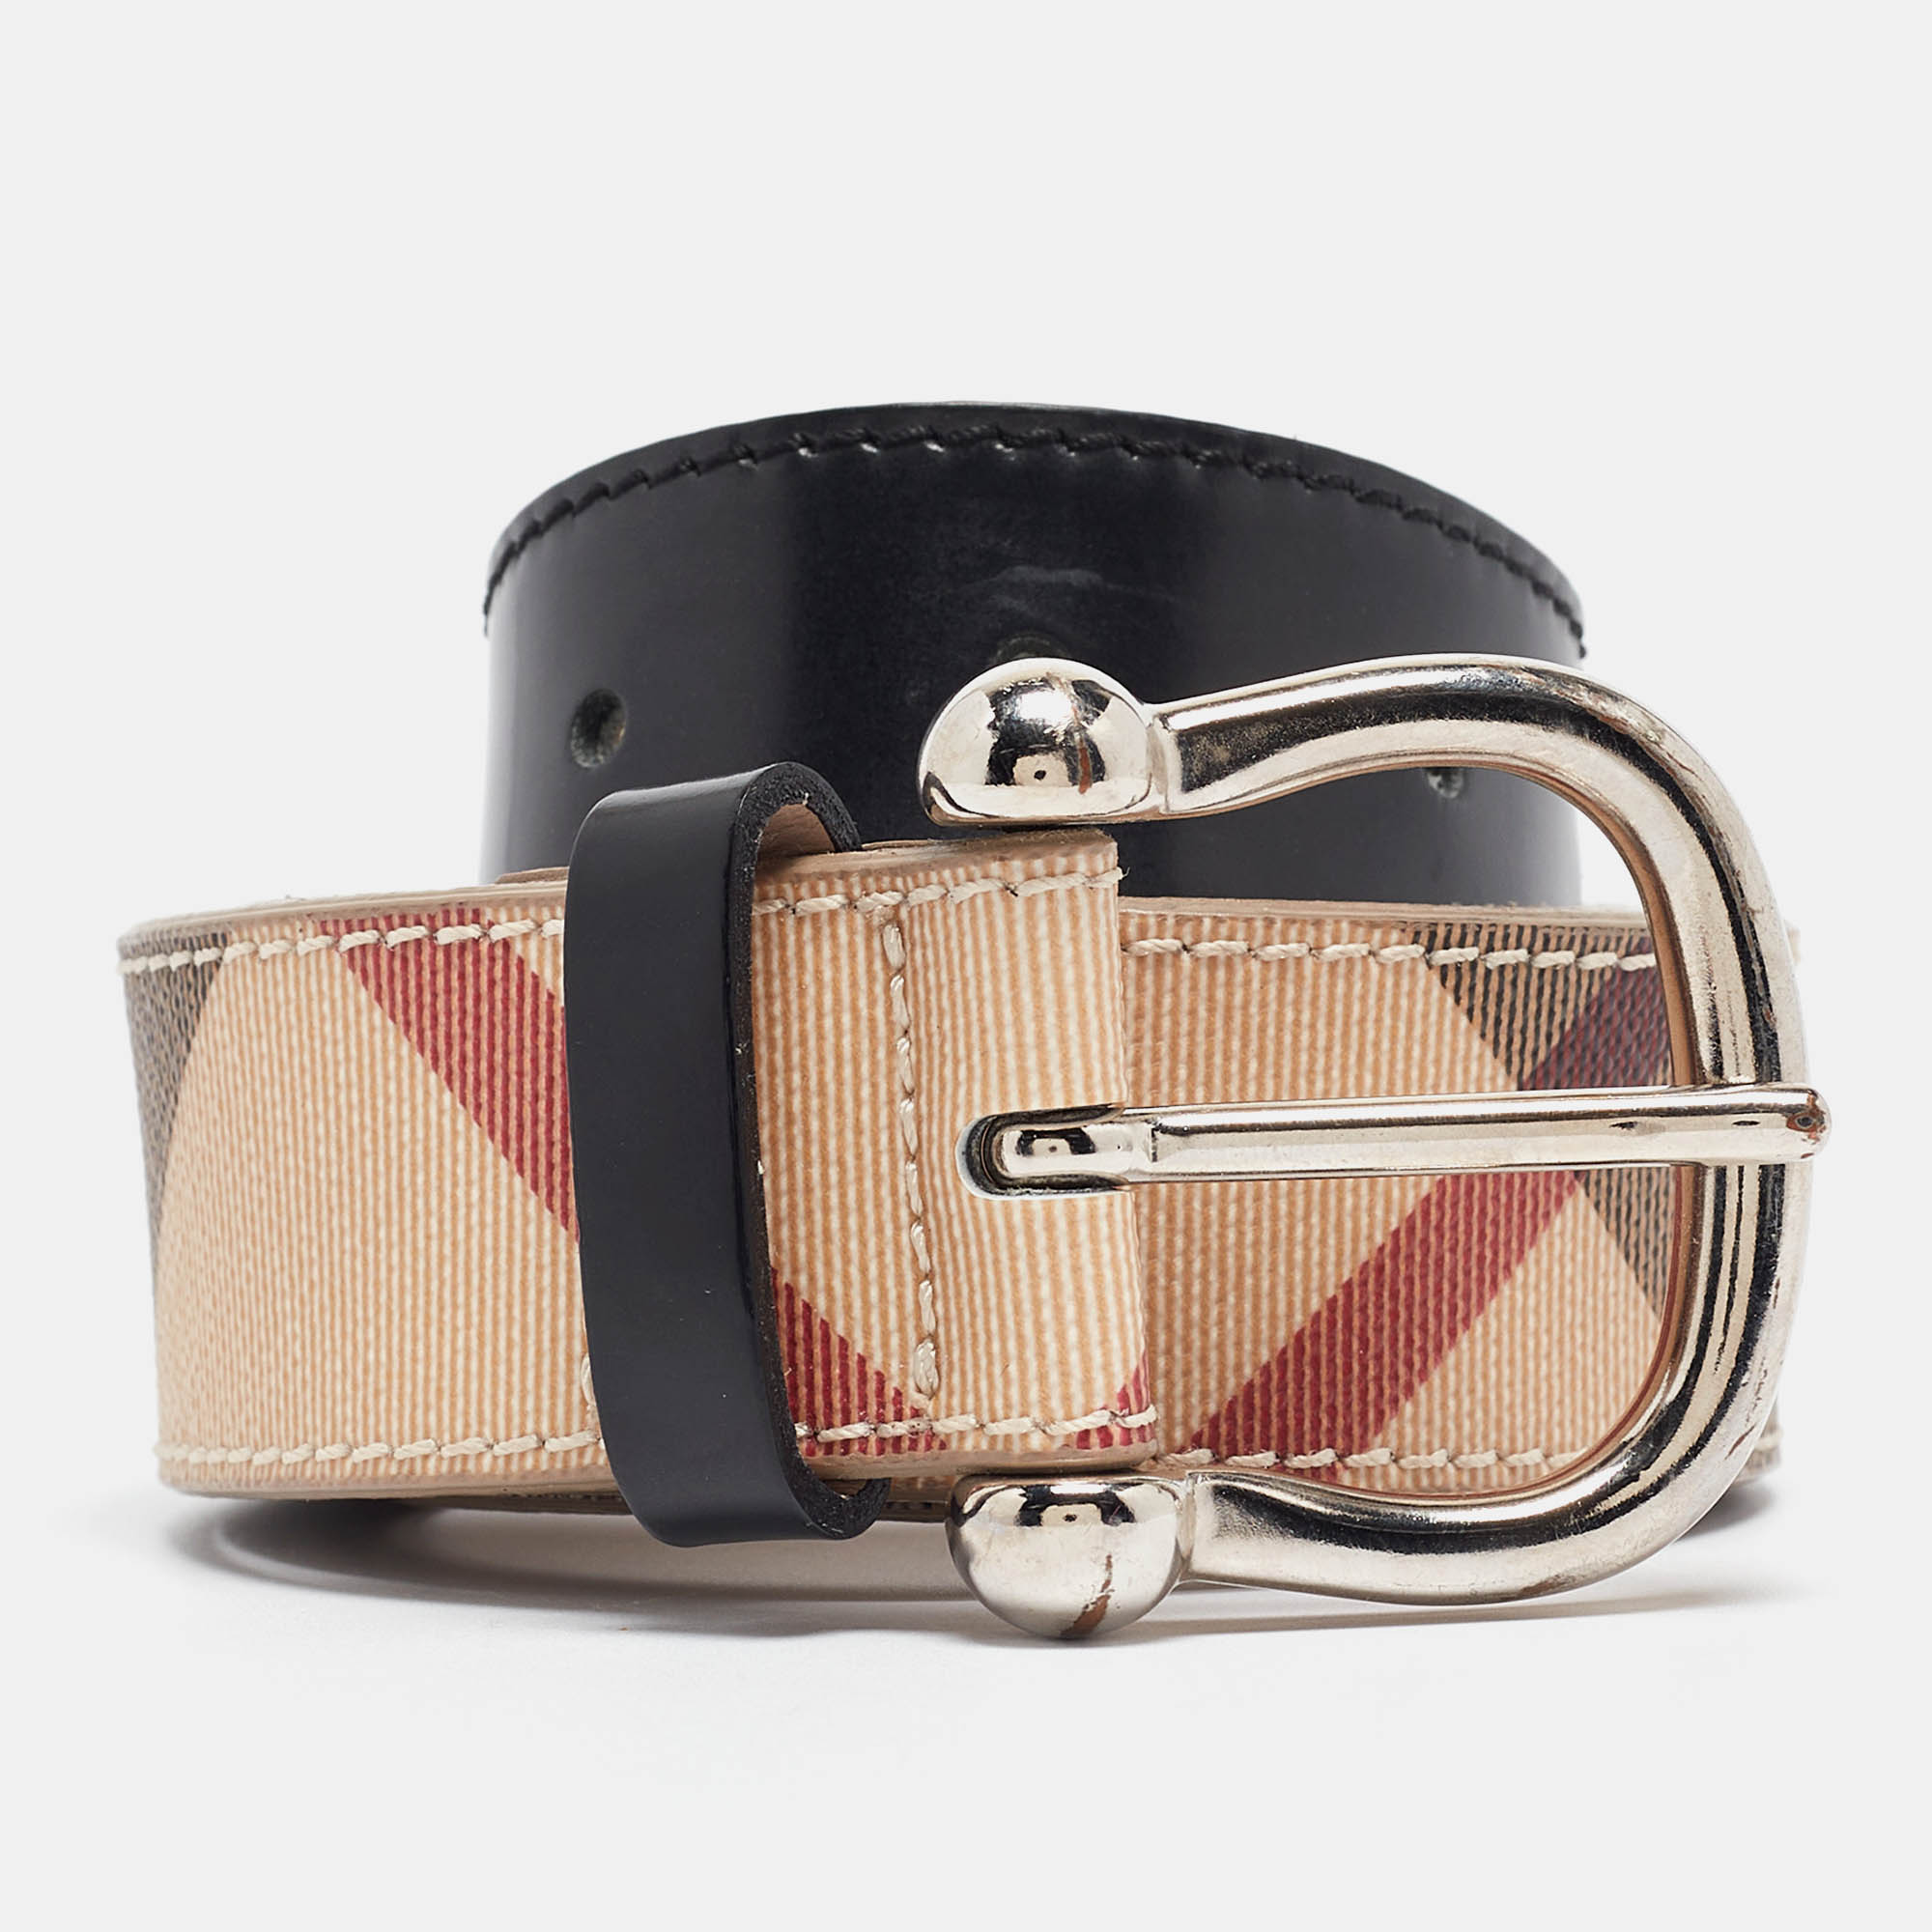 Burberry beige/black house check pvc and leather buckle belt 100cm